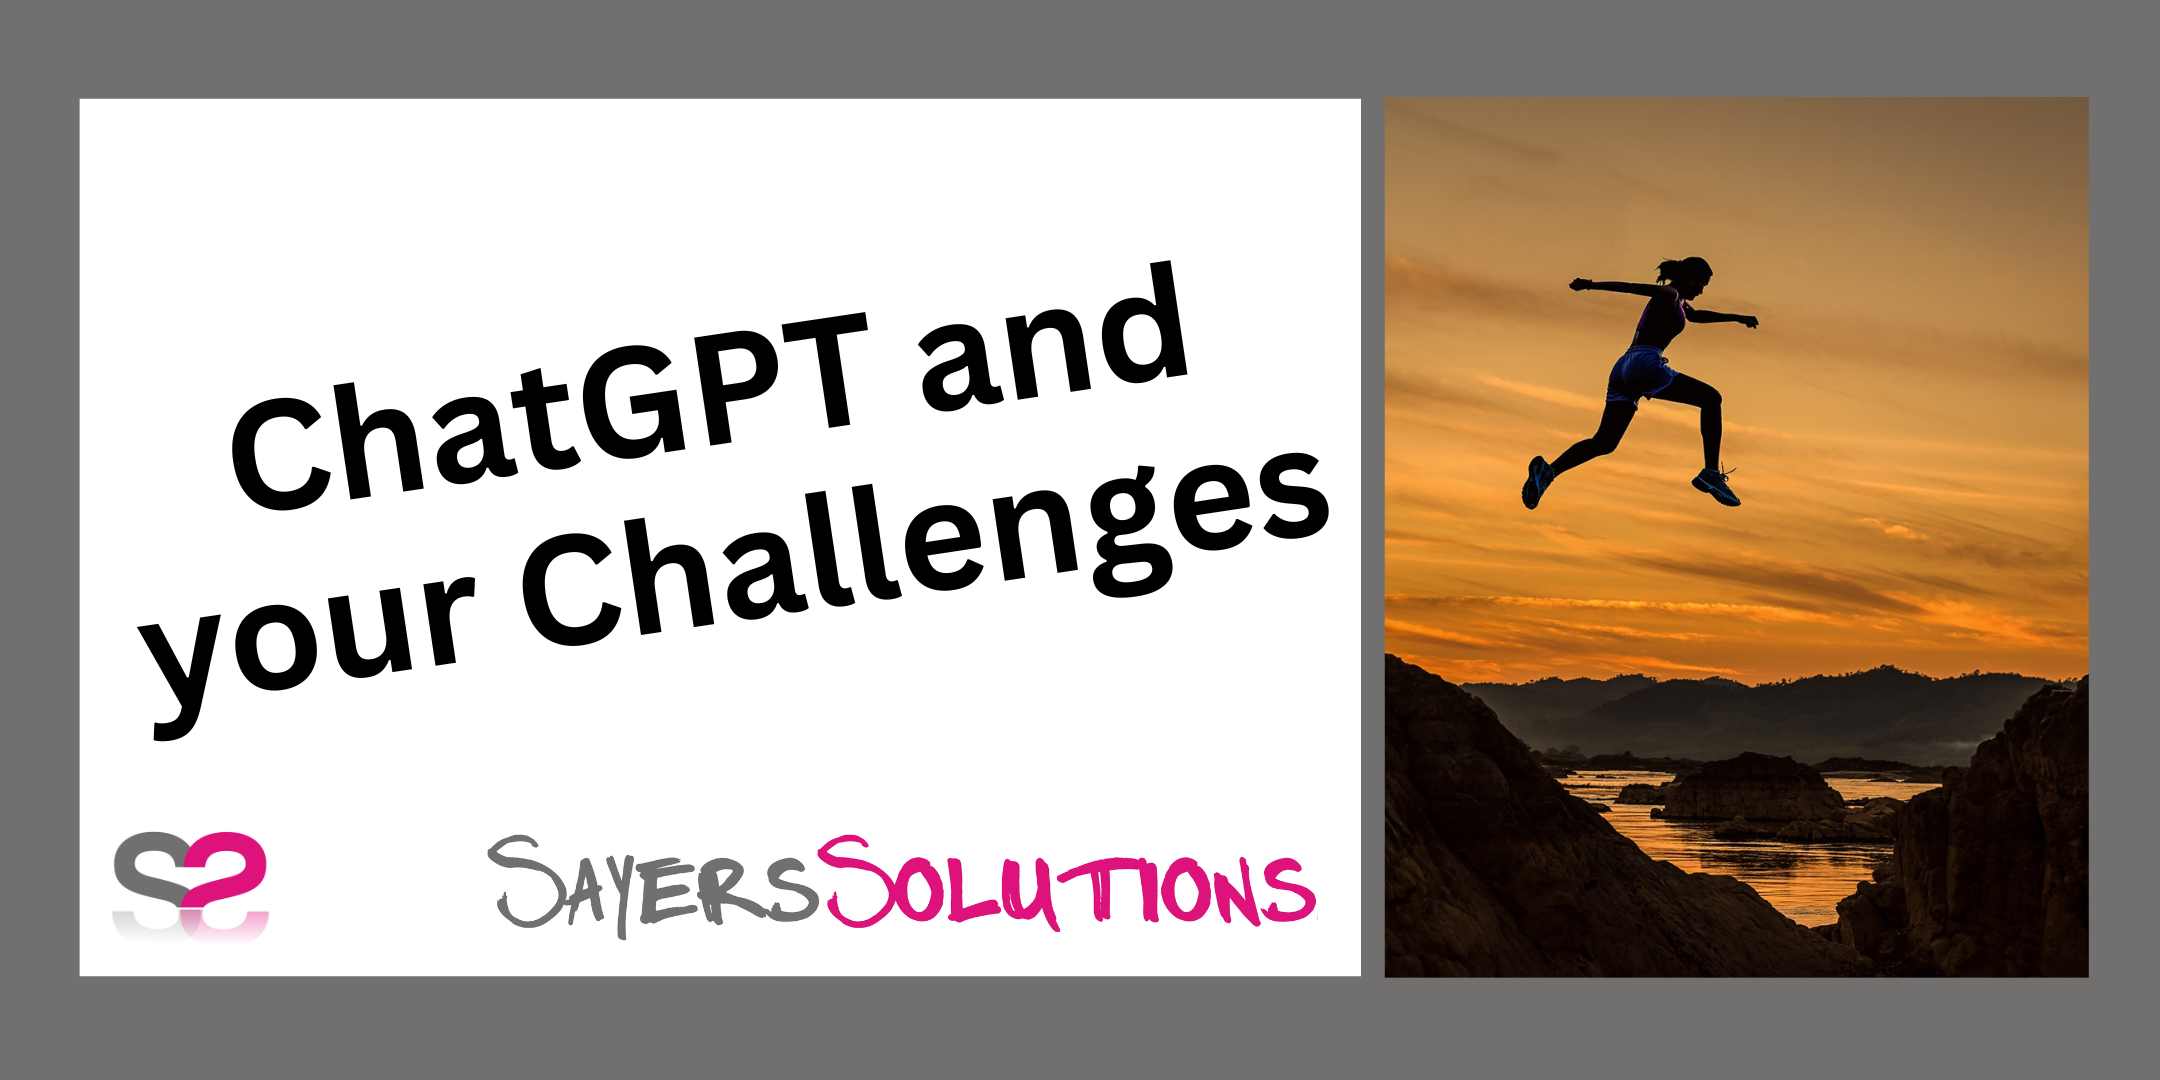 ChatGPT and Challenges